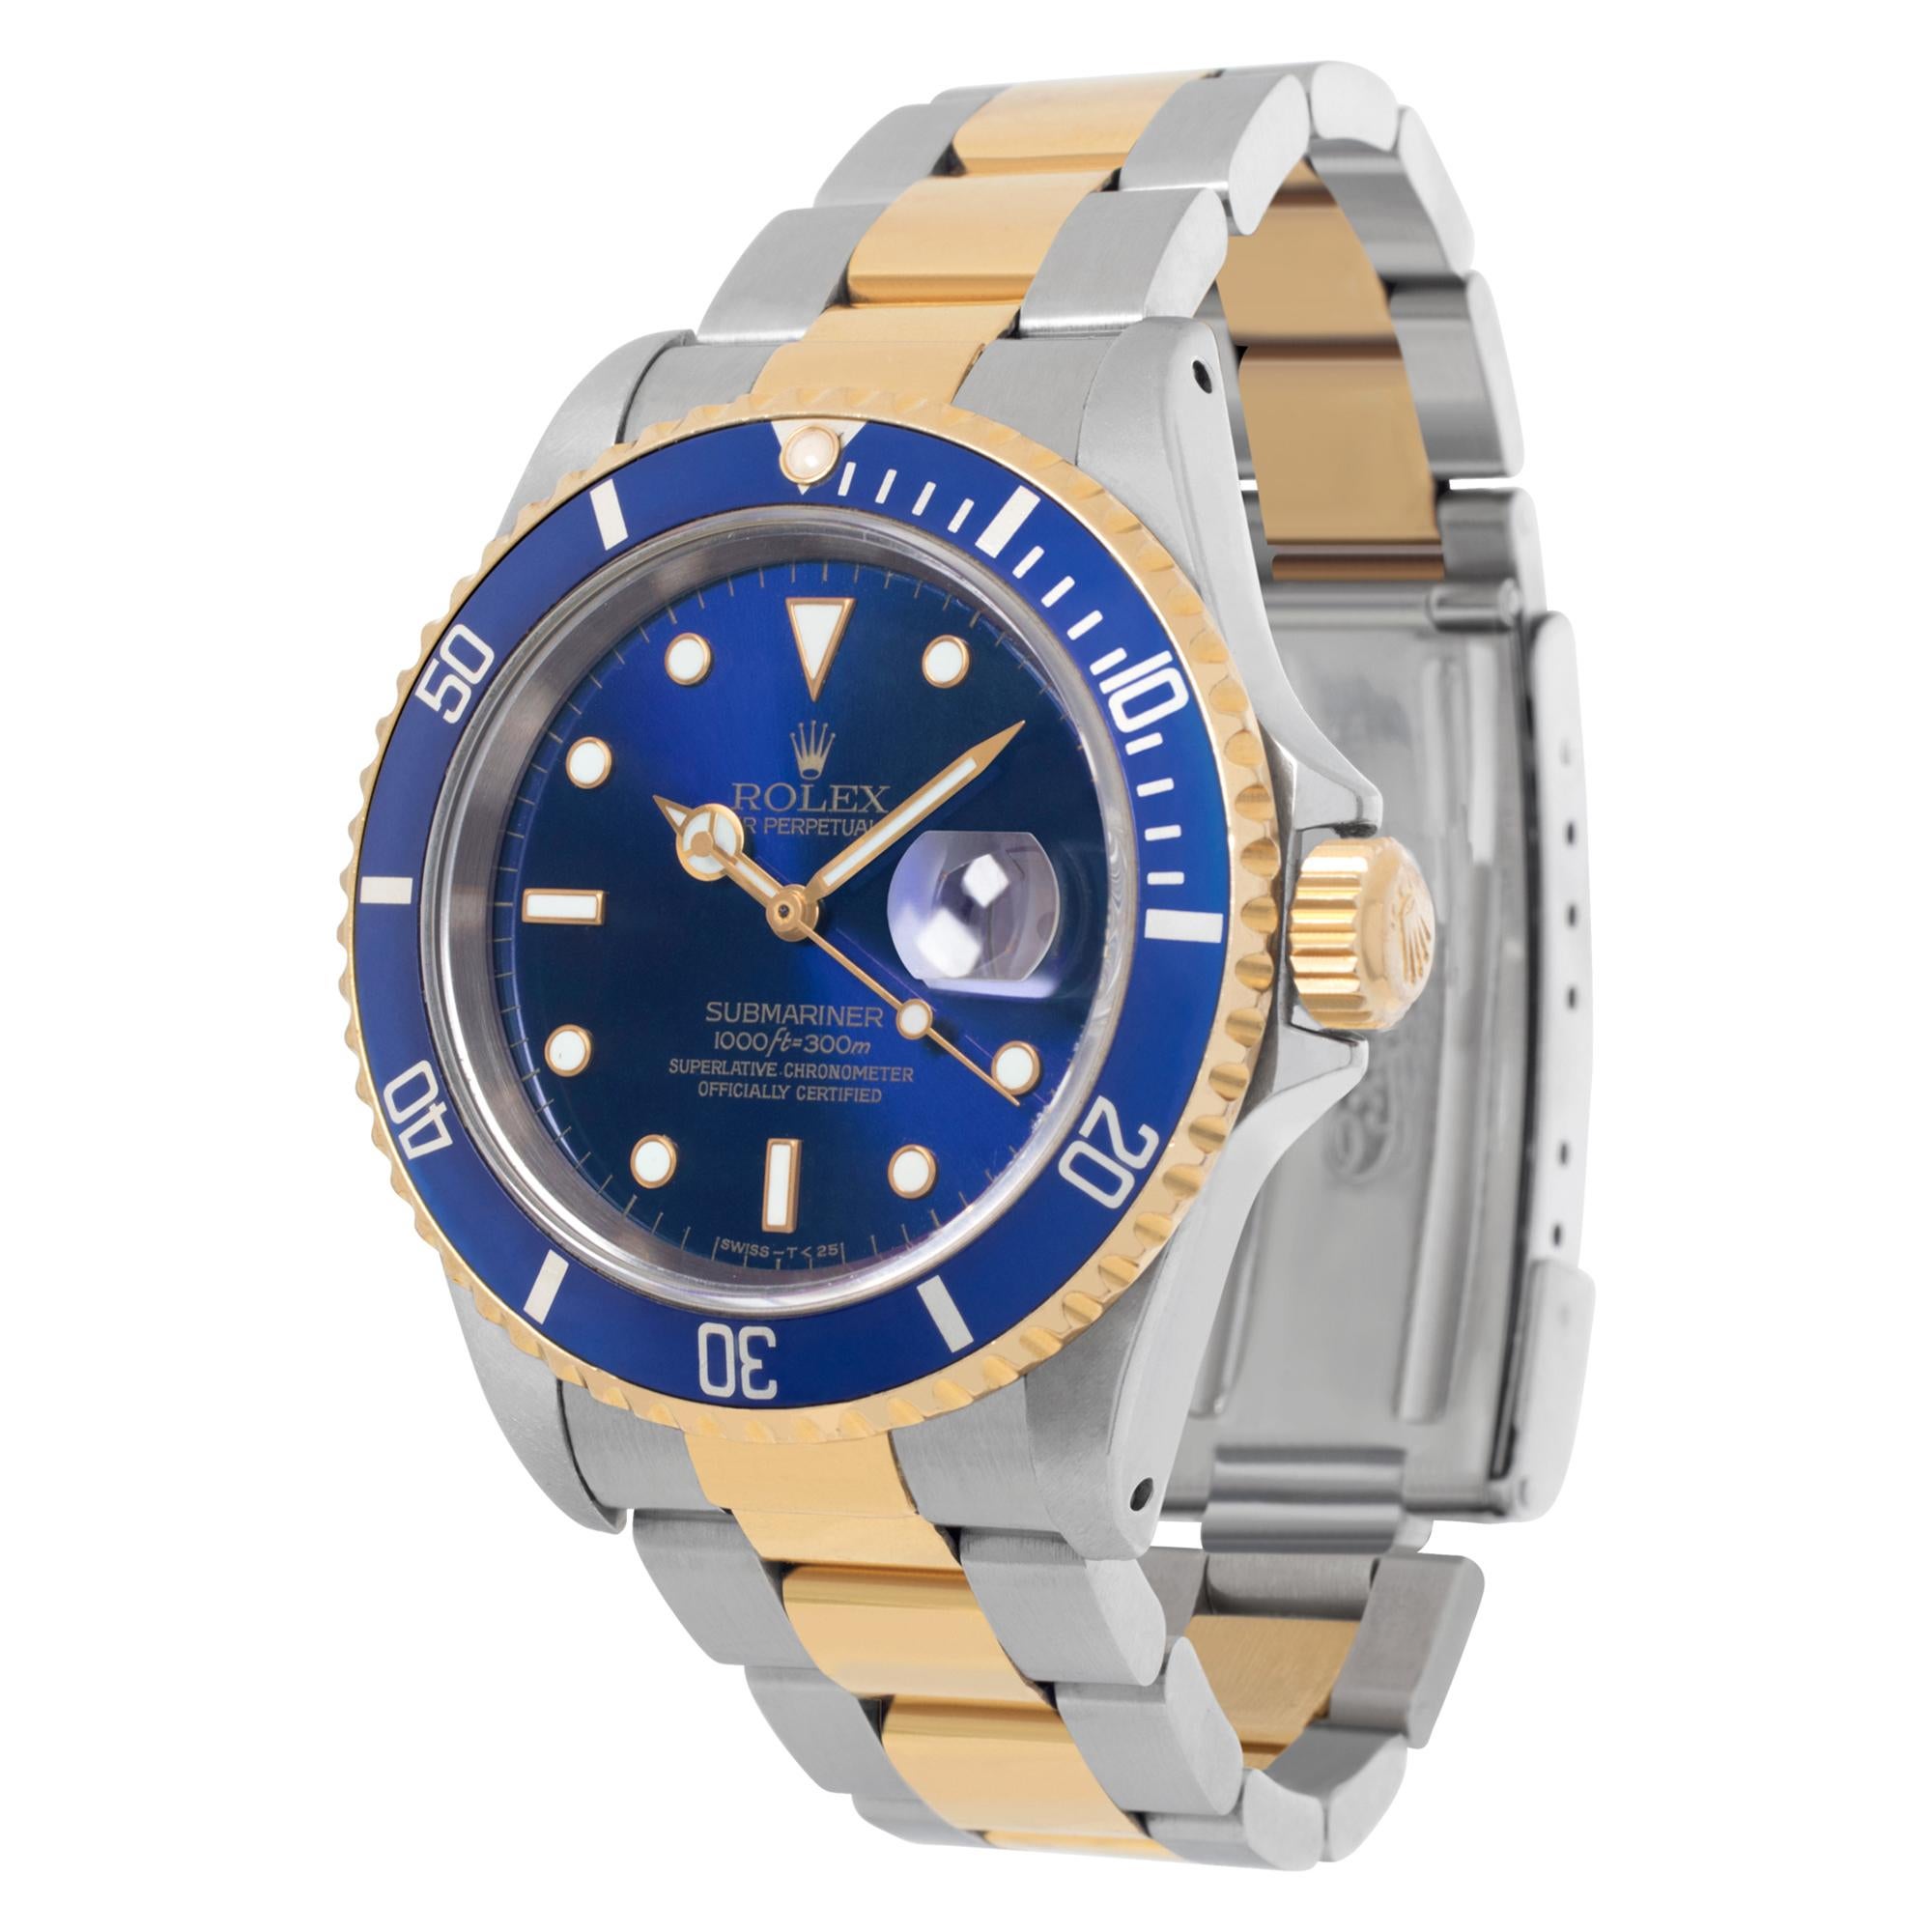 Rolex Submariner in 18k & stainless steel. Auto w/ sweep seconds and date. 40 mm case size. With box and papers. Ref 16613. Circa 1995. **Bank wire only at this price**. Fine Pre-owned Rolex Watch.

Certified preowned Sport Rolex Submariner 16613